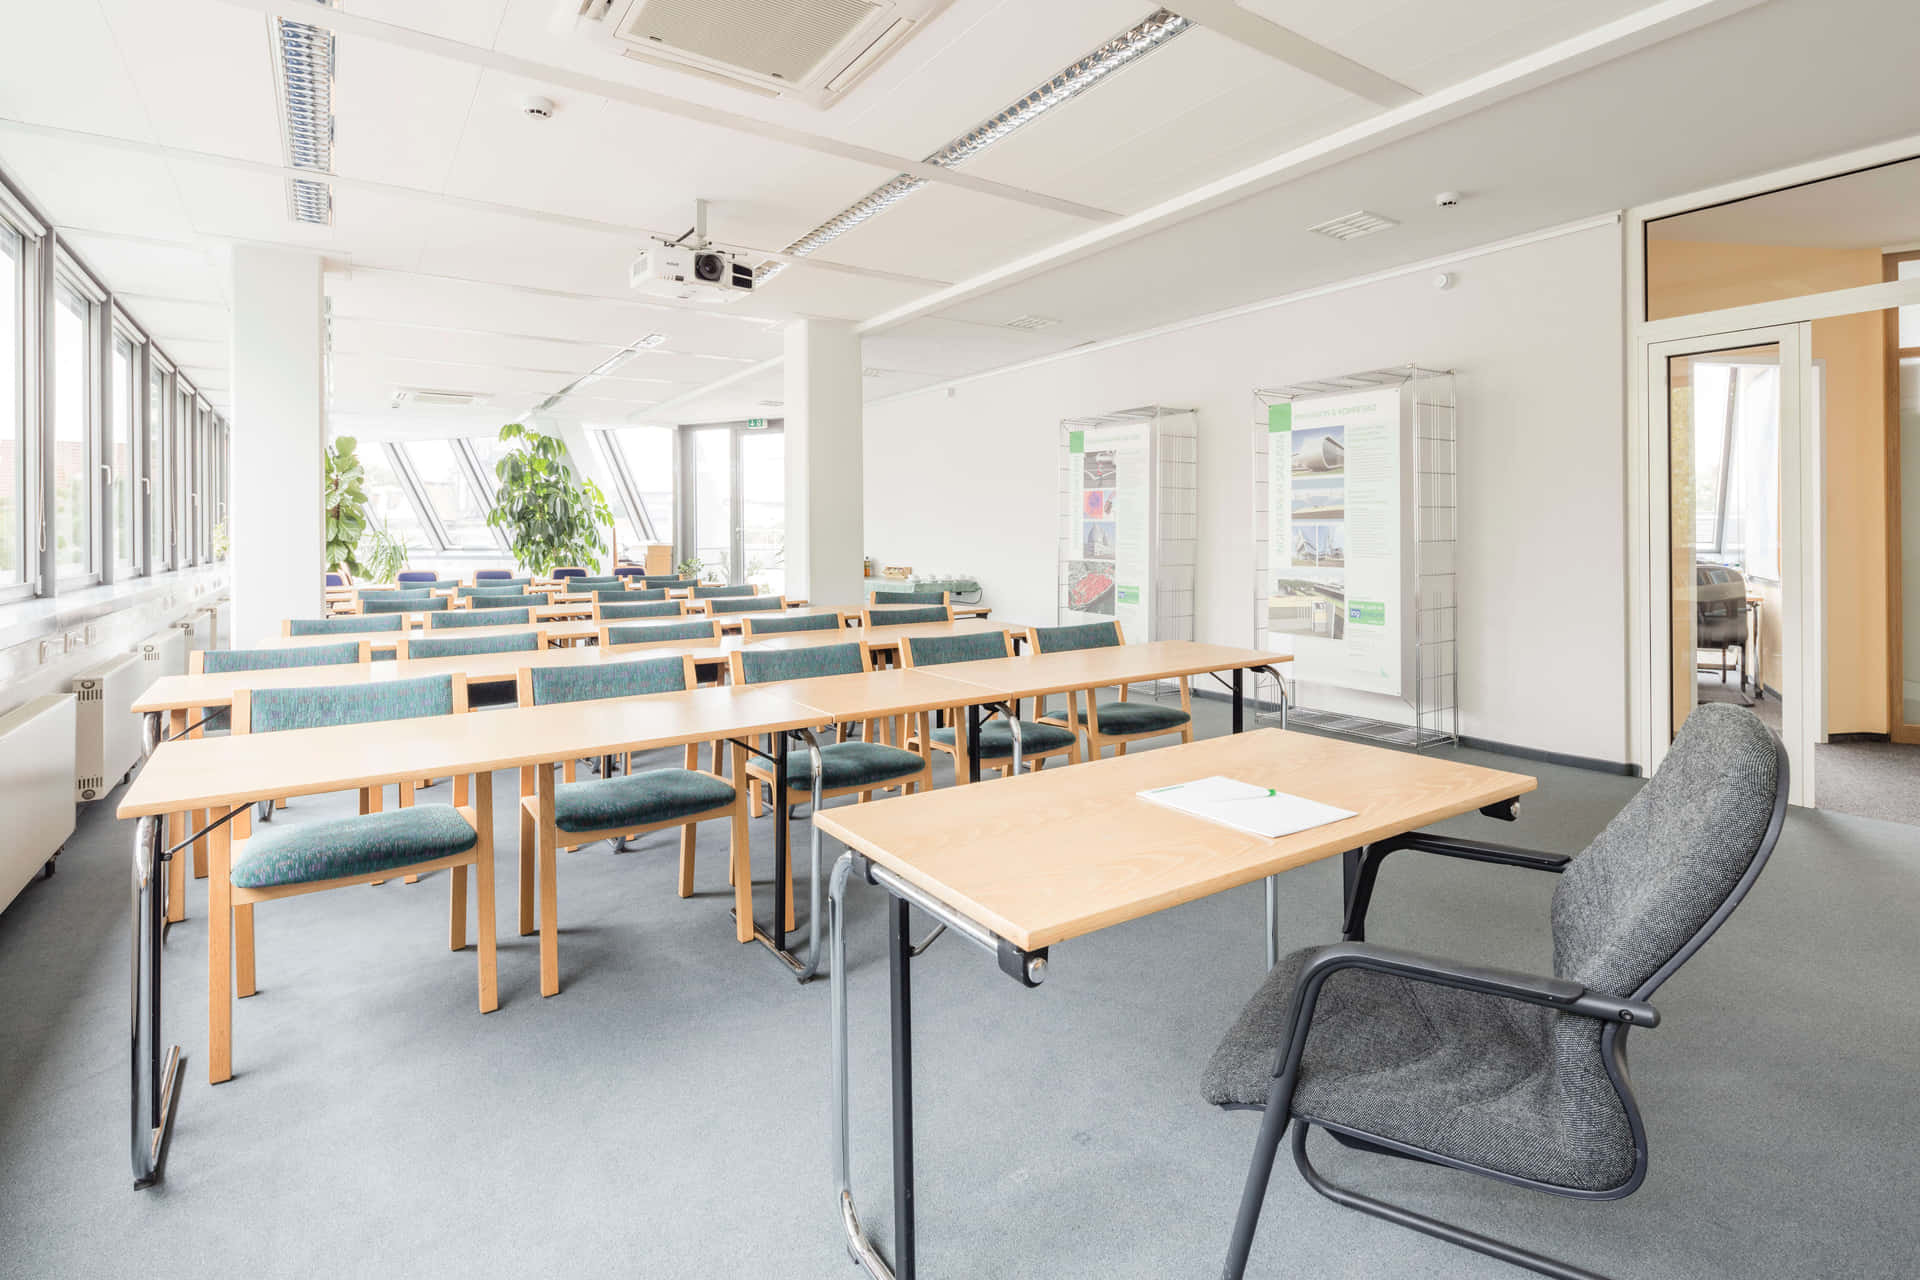 Classroom With Nordic Tables And Chairs Background